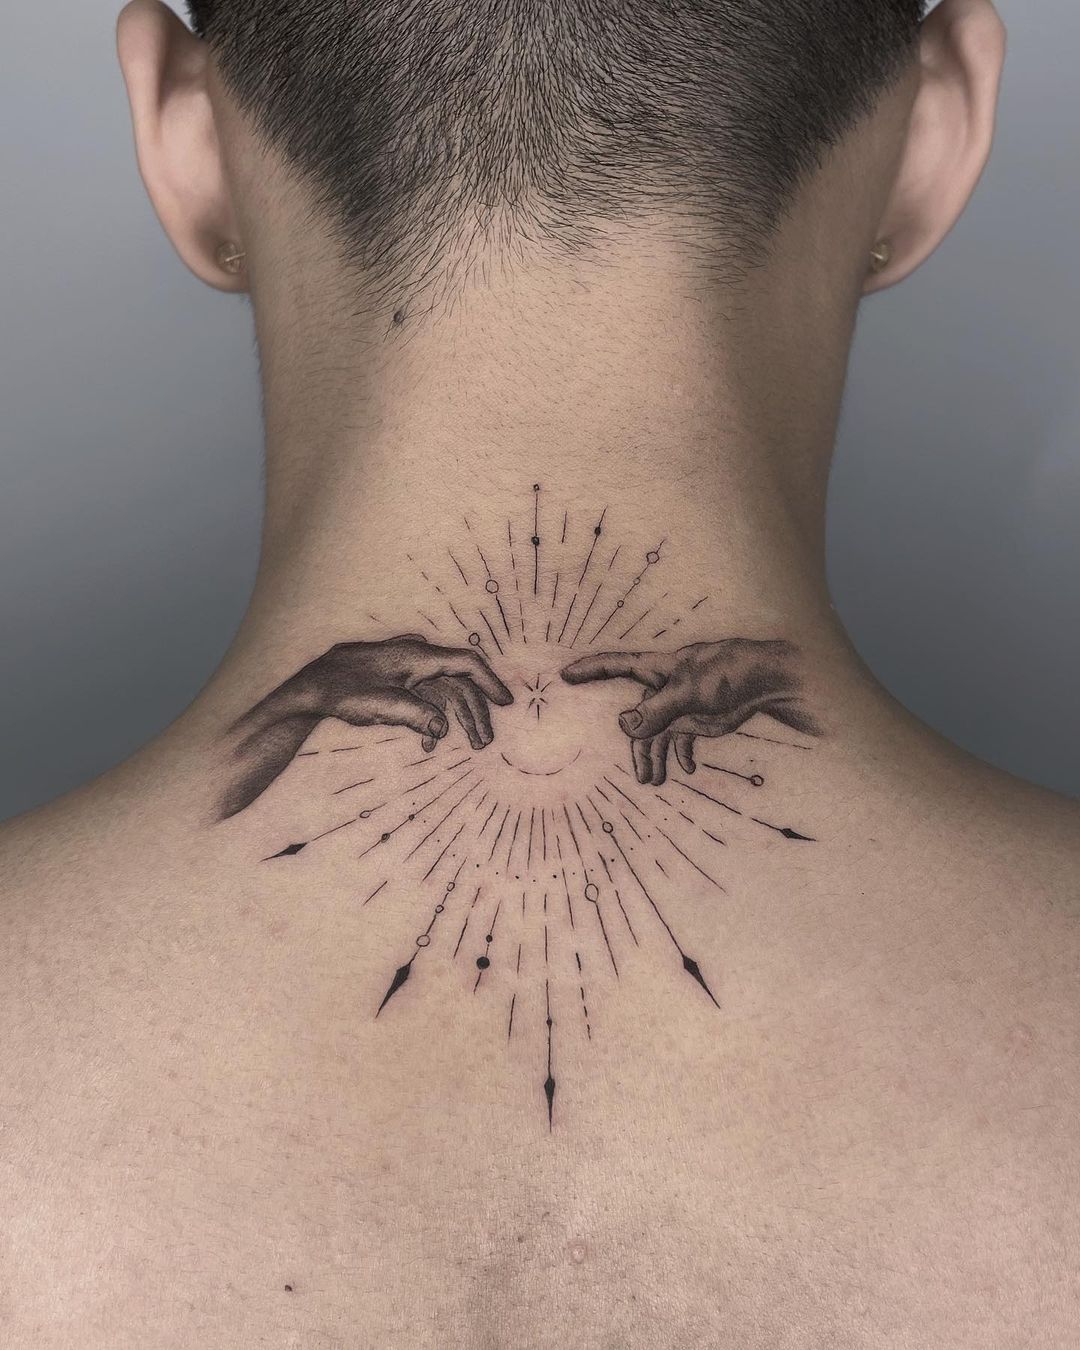 Mystical neck tattoos do so well on men! Show that you’re also in touch with your private side.